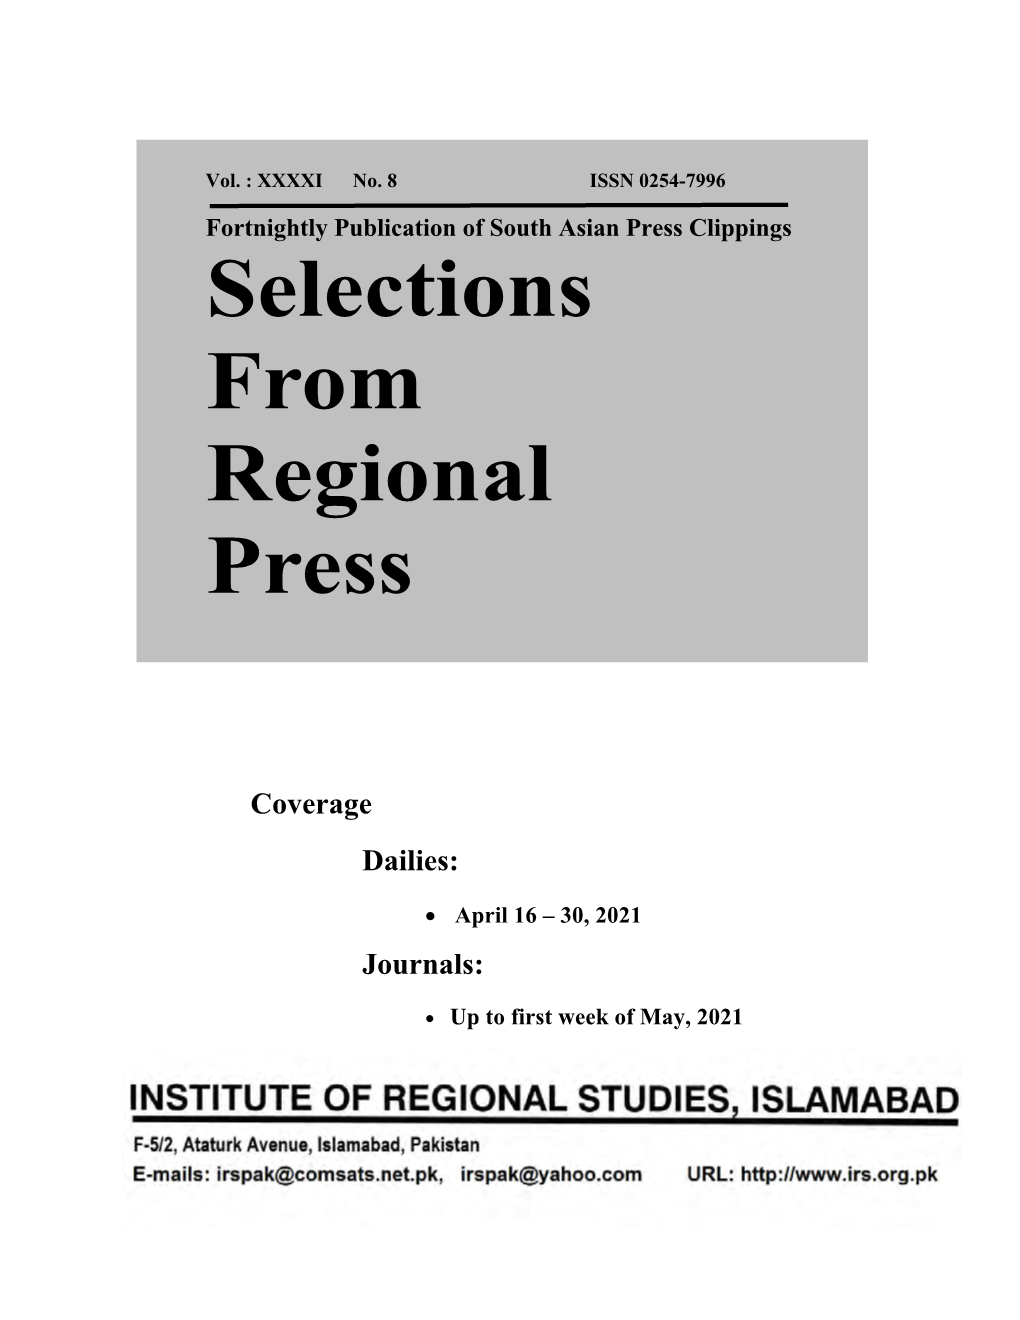 Selections from Regional Press